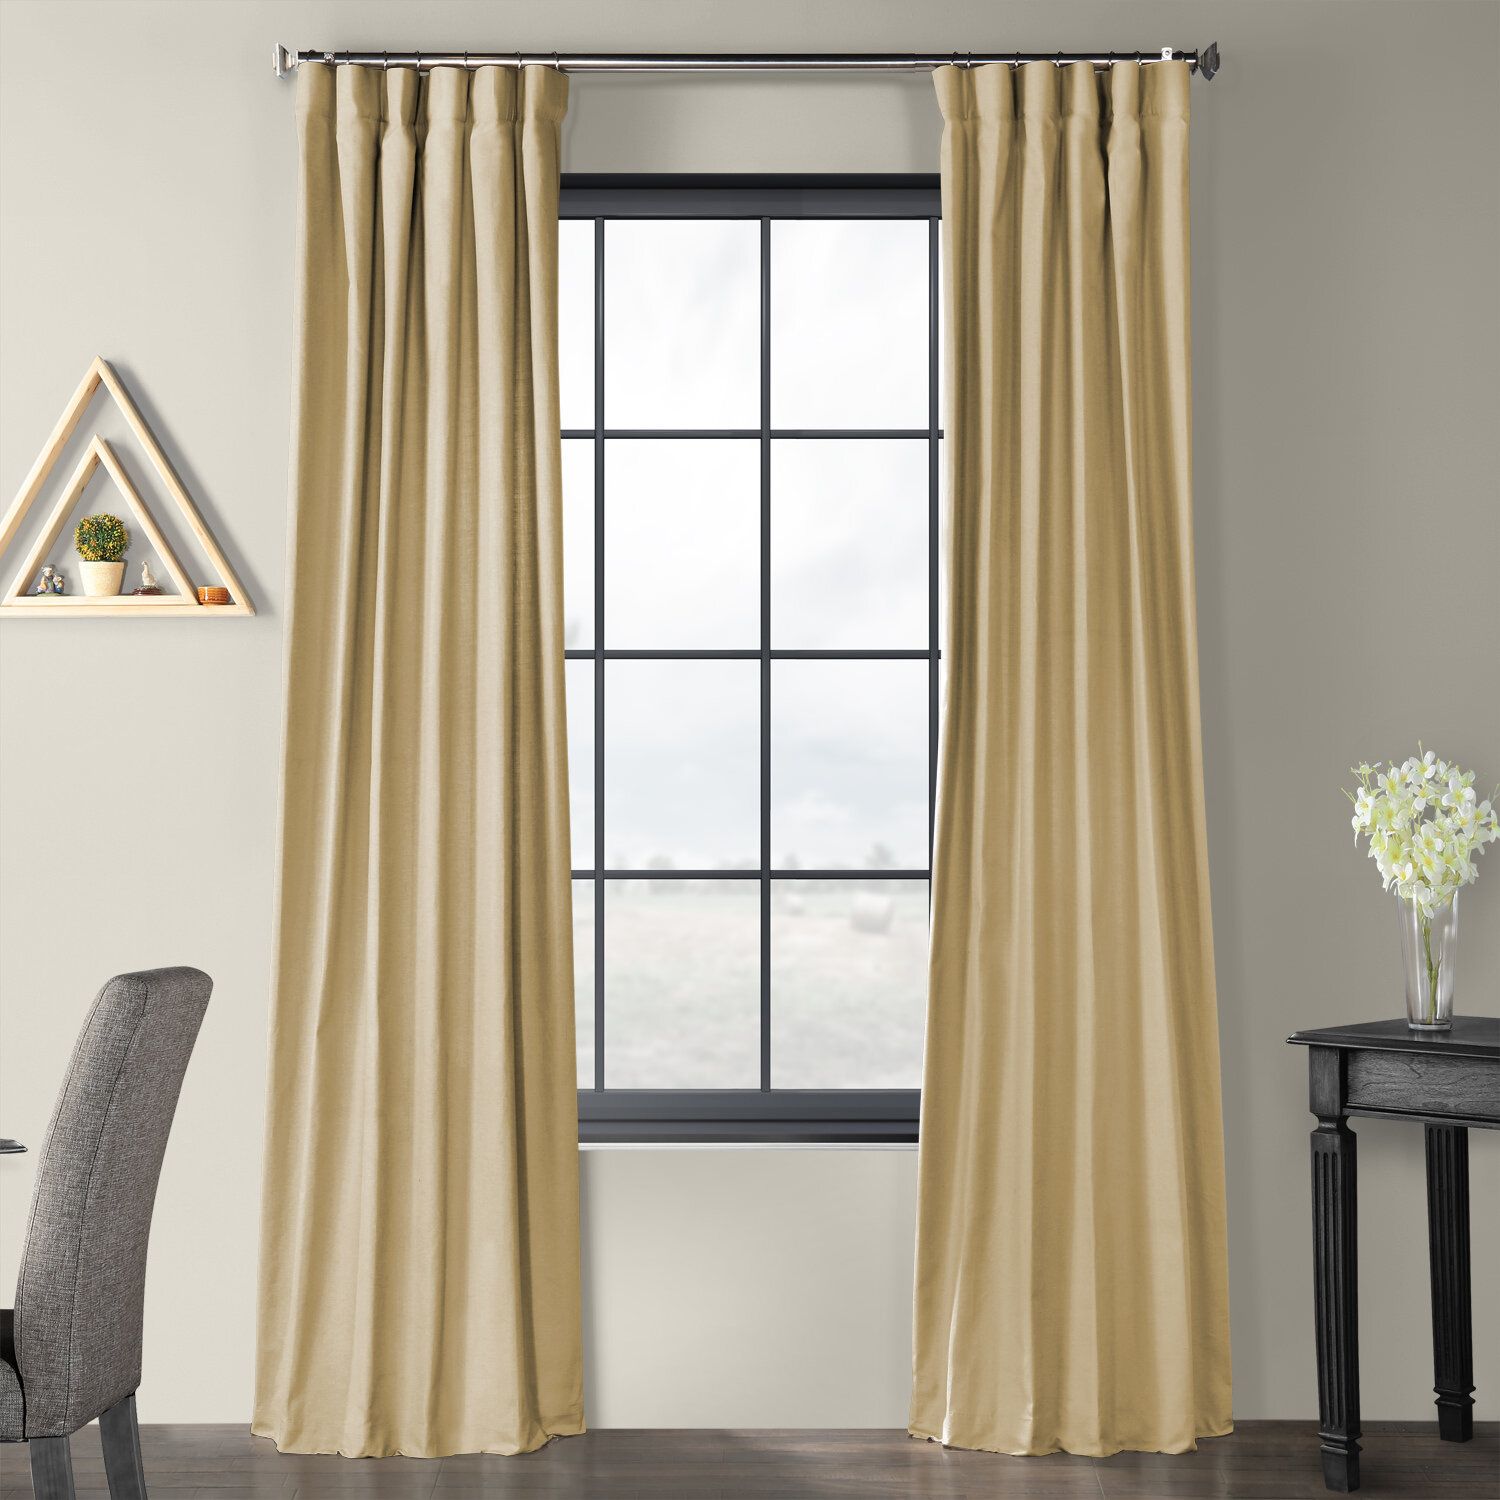 Sanger Solid Country Cotton Linen Weave Rod Pocket Single Curtain Panel Inside Solid Country Cotton Linen Weave Curtain Panels (View 6 of 30)